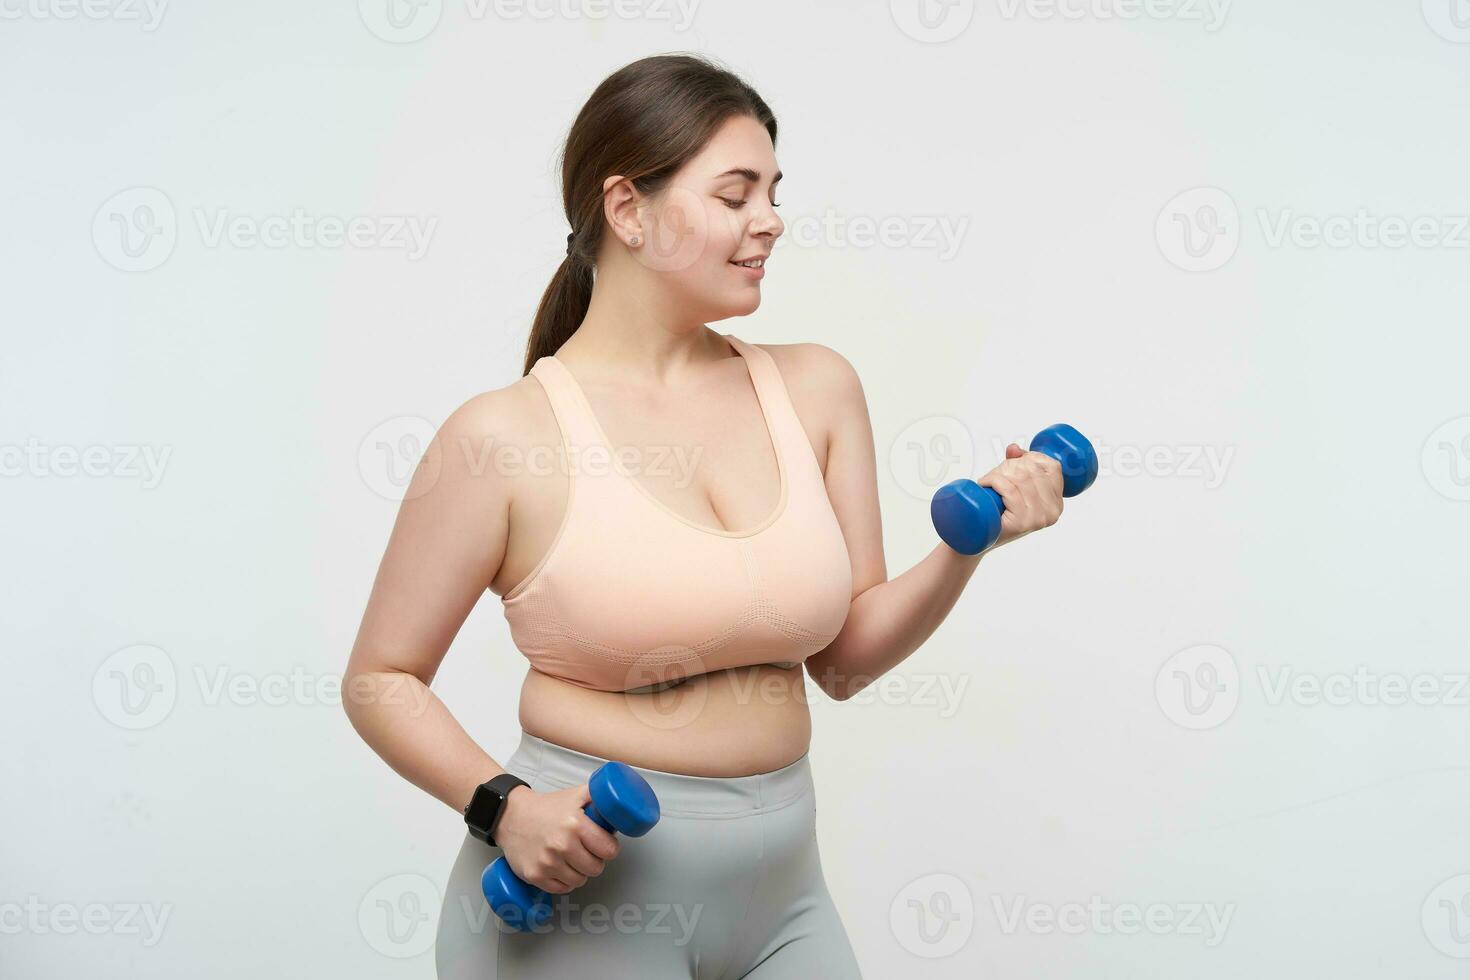 Indoor photo of young dark haired chubby woman dressed in sporty wear training her arms using little dumbbells while standing over white background. Body positive concept